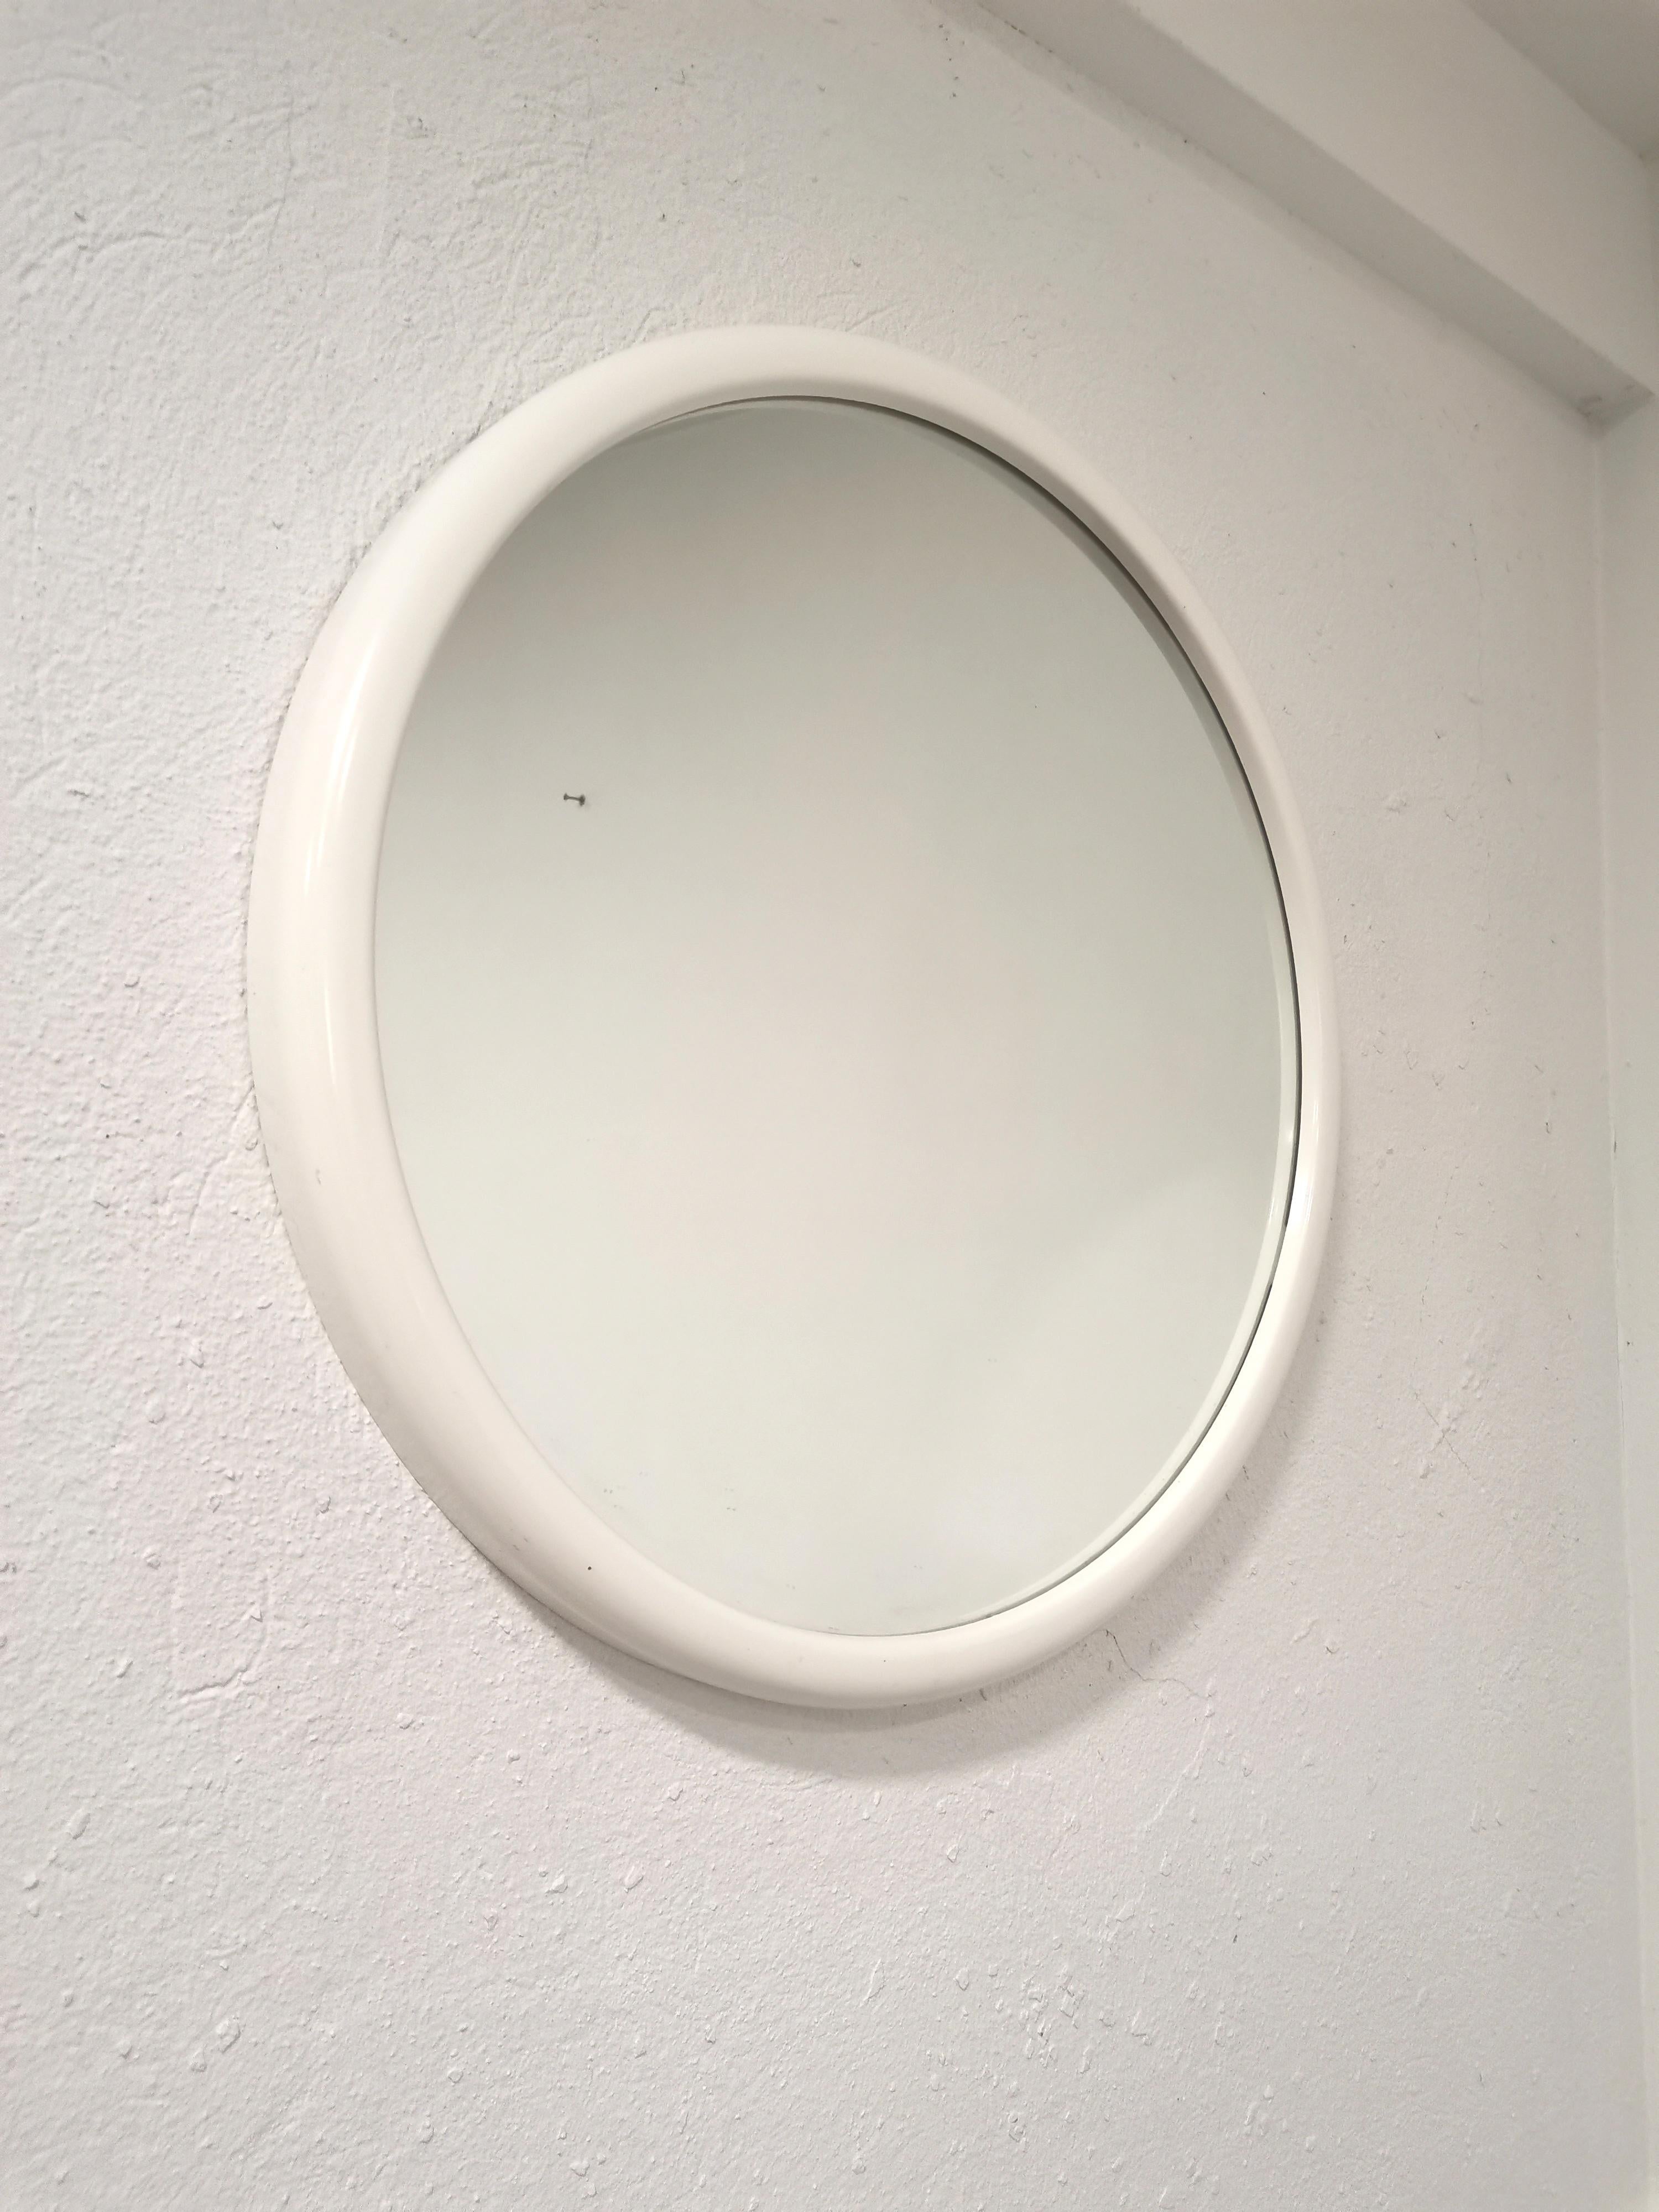 Vintage Italian Mirror. Made in 1970s. Simplicity of form and eternal design. This mirror will upgrade any room with its minimalistic aesthetic in white. 
material: plastic, mirror
Condition:very good vintage condition with some traces of use and